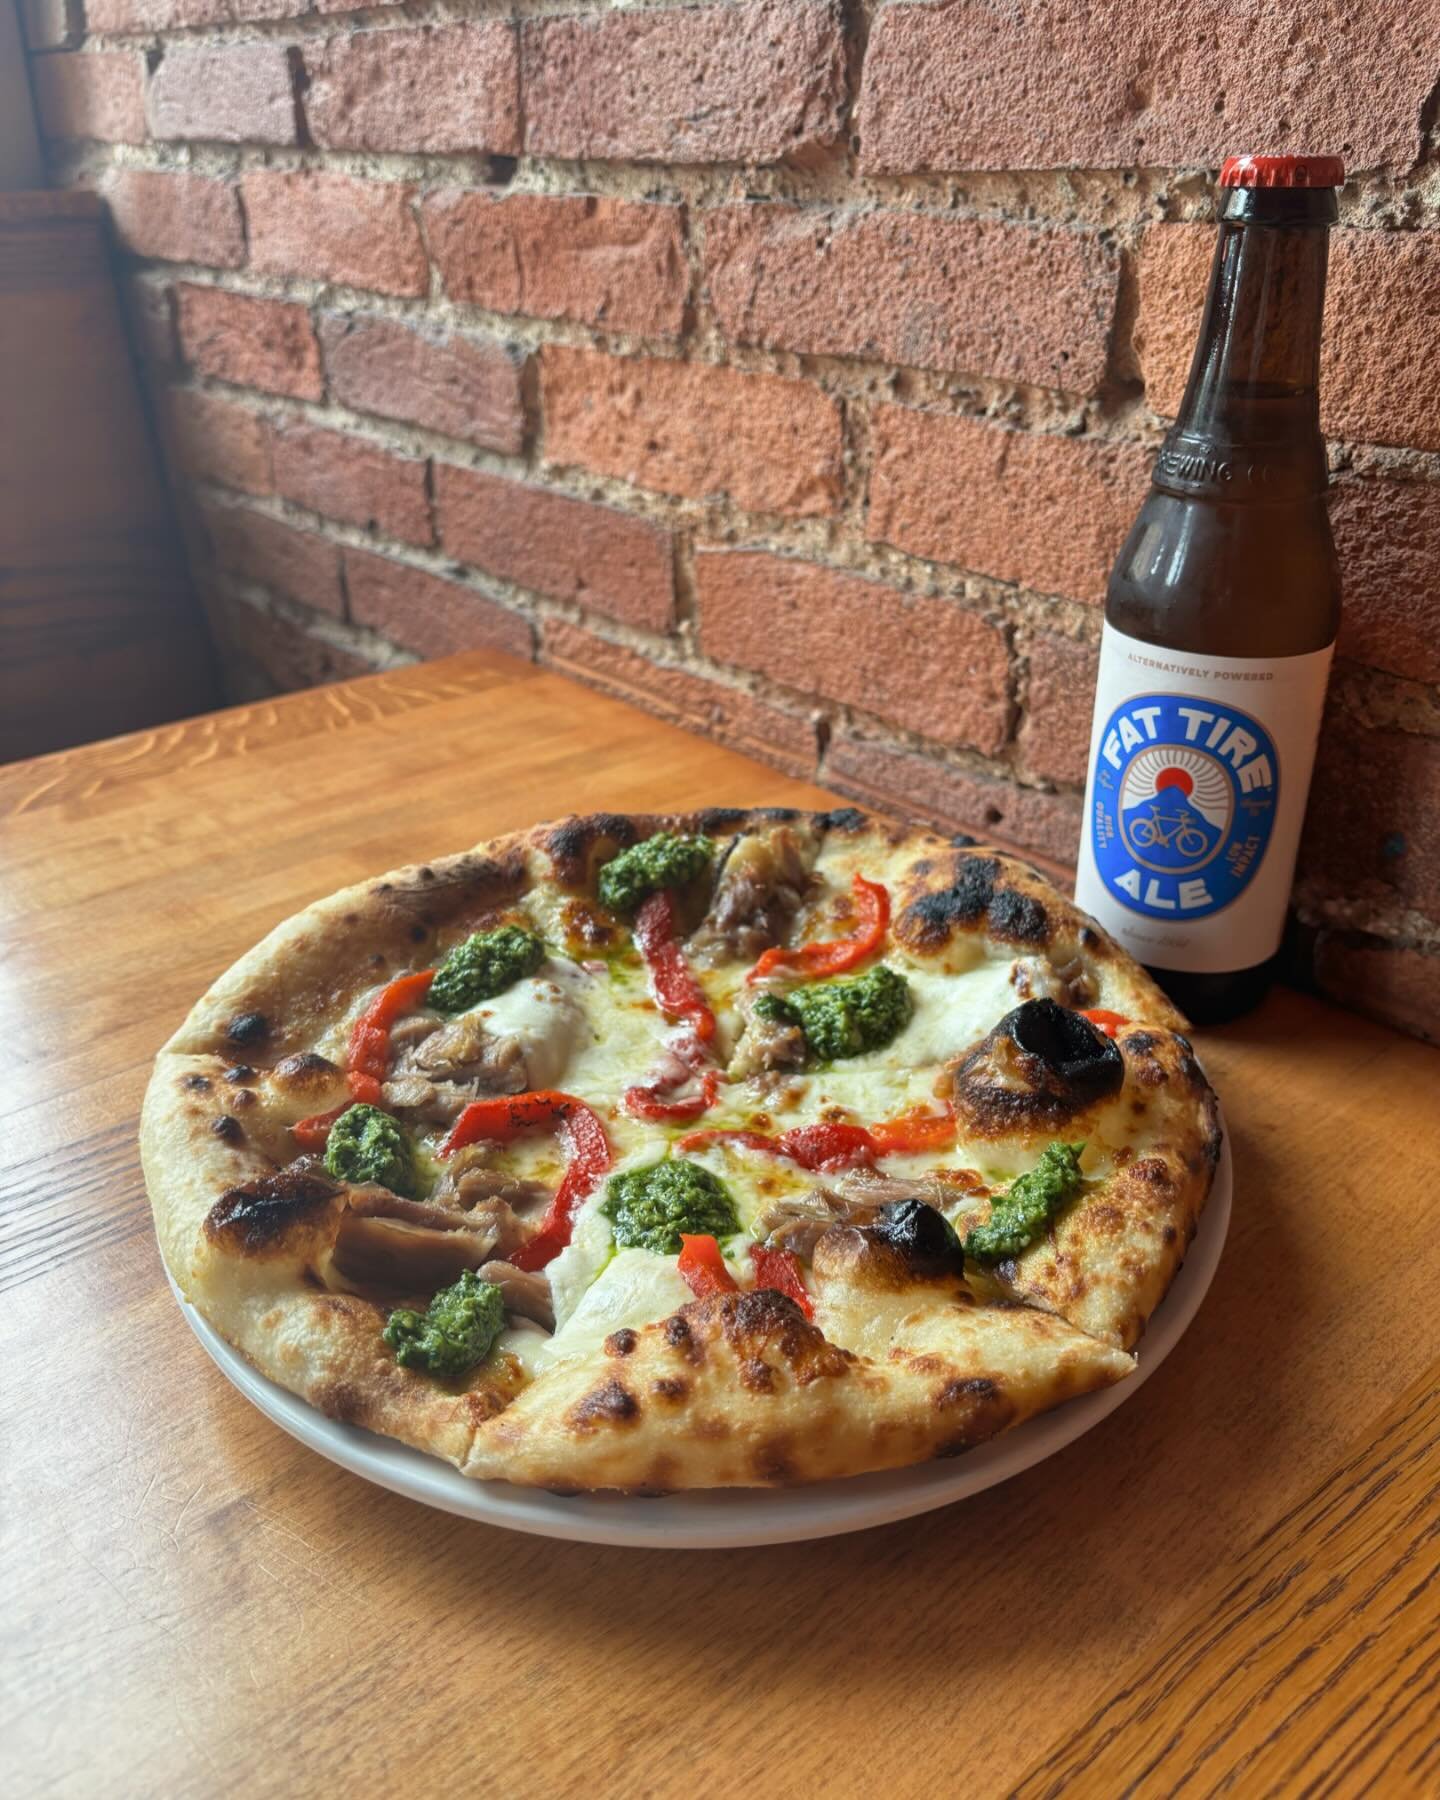 Quack! 🦆 Pizza with Arugula Pesto, Roasted Red Peppers, and Fresh Mozzarella on special this weekend.